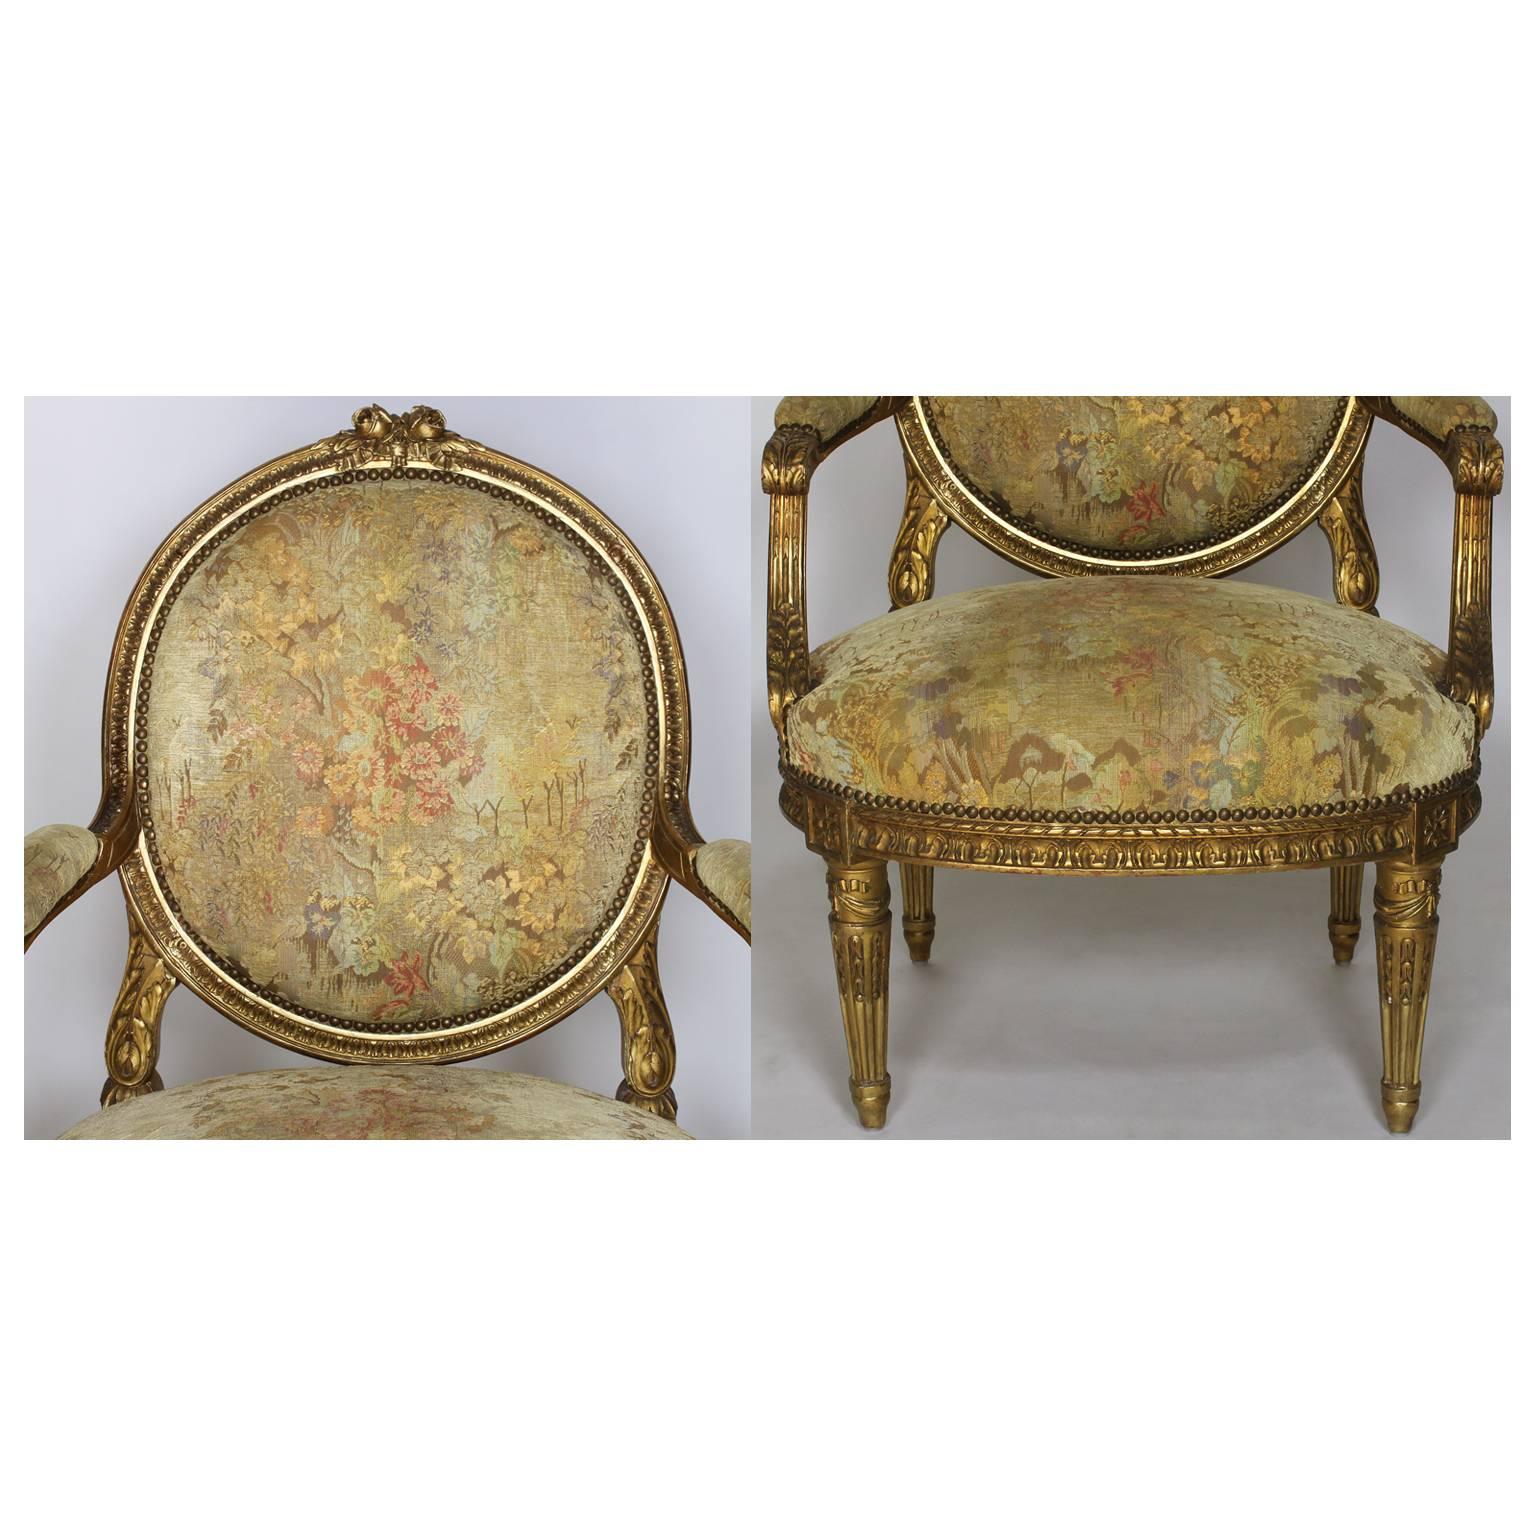 Fine French 19th Century Louis XVI Style Giltwood Carved Five-Piece Salon Suite 6